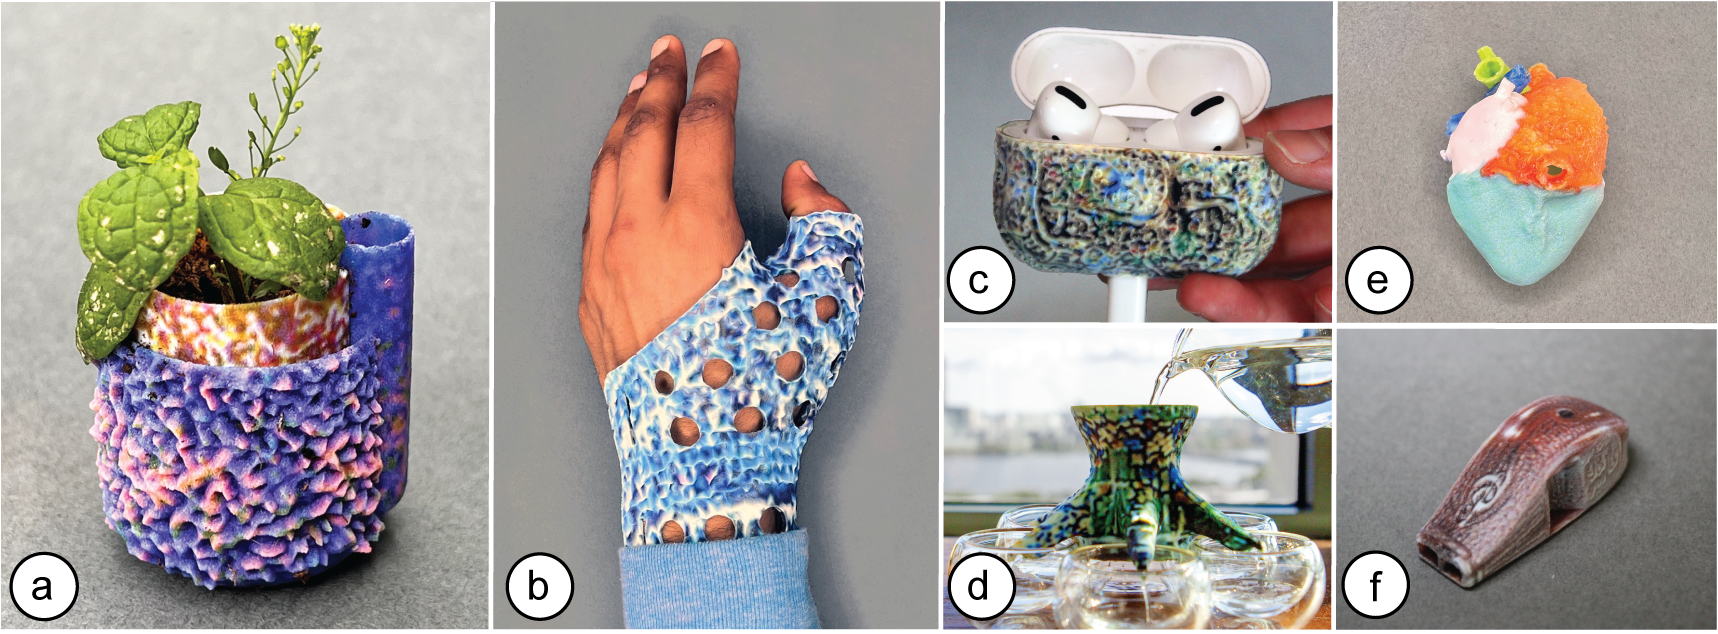 Figure 8: Application scenarios for Style2Fab (all models sourced from Thingiverse): (a) A multi-component self-watering
							planter styled as “A rough multi-color Chinoiserie Planter”. (b) A personalized Thumb Splint styled like “a blue knitted sweater”.
							(c) A personalized AirPods cover “in the style of Moroccan Art”. (d) A Drinks Dispenser model styled as “made of vintage mosaic
							glass tiles”. (e) A color-coded, textured educational model of the human heart. (f) A functional whistle styled as “A beautiful
							whistle made of mahogany wood”